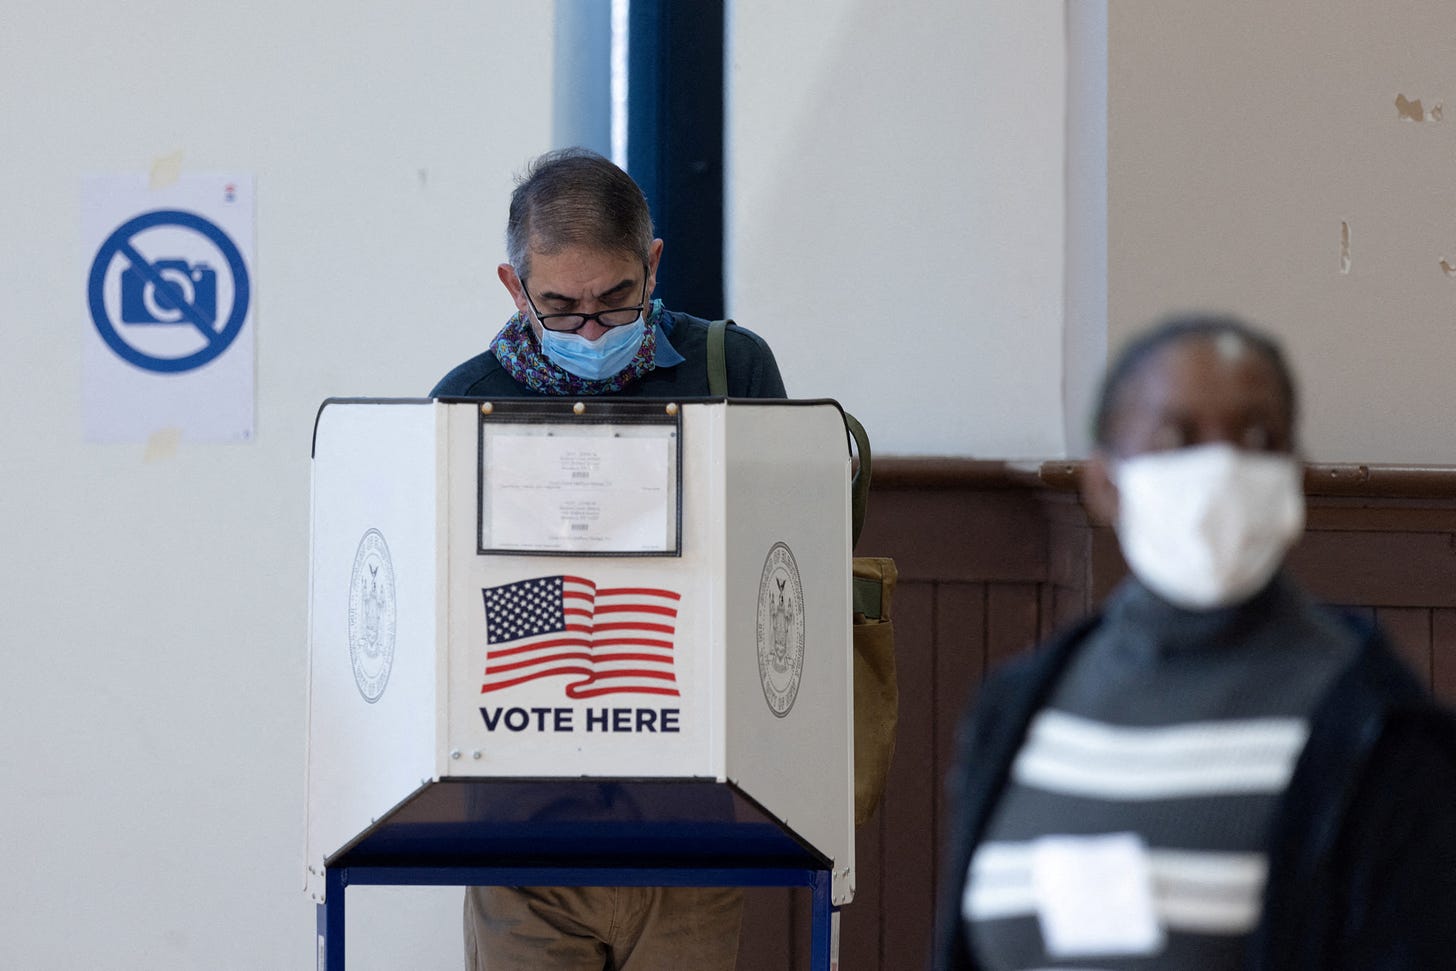 Voters cast their ballots at a polling station during early voting in New York City